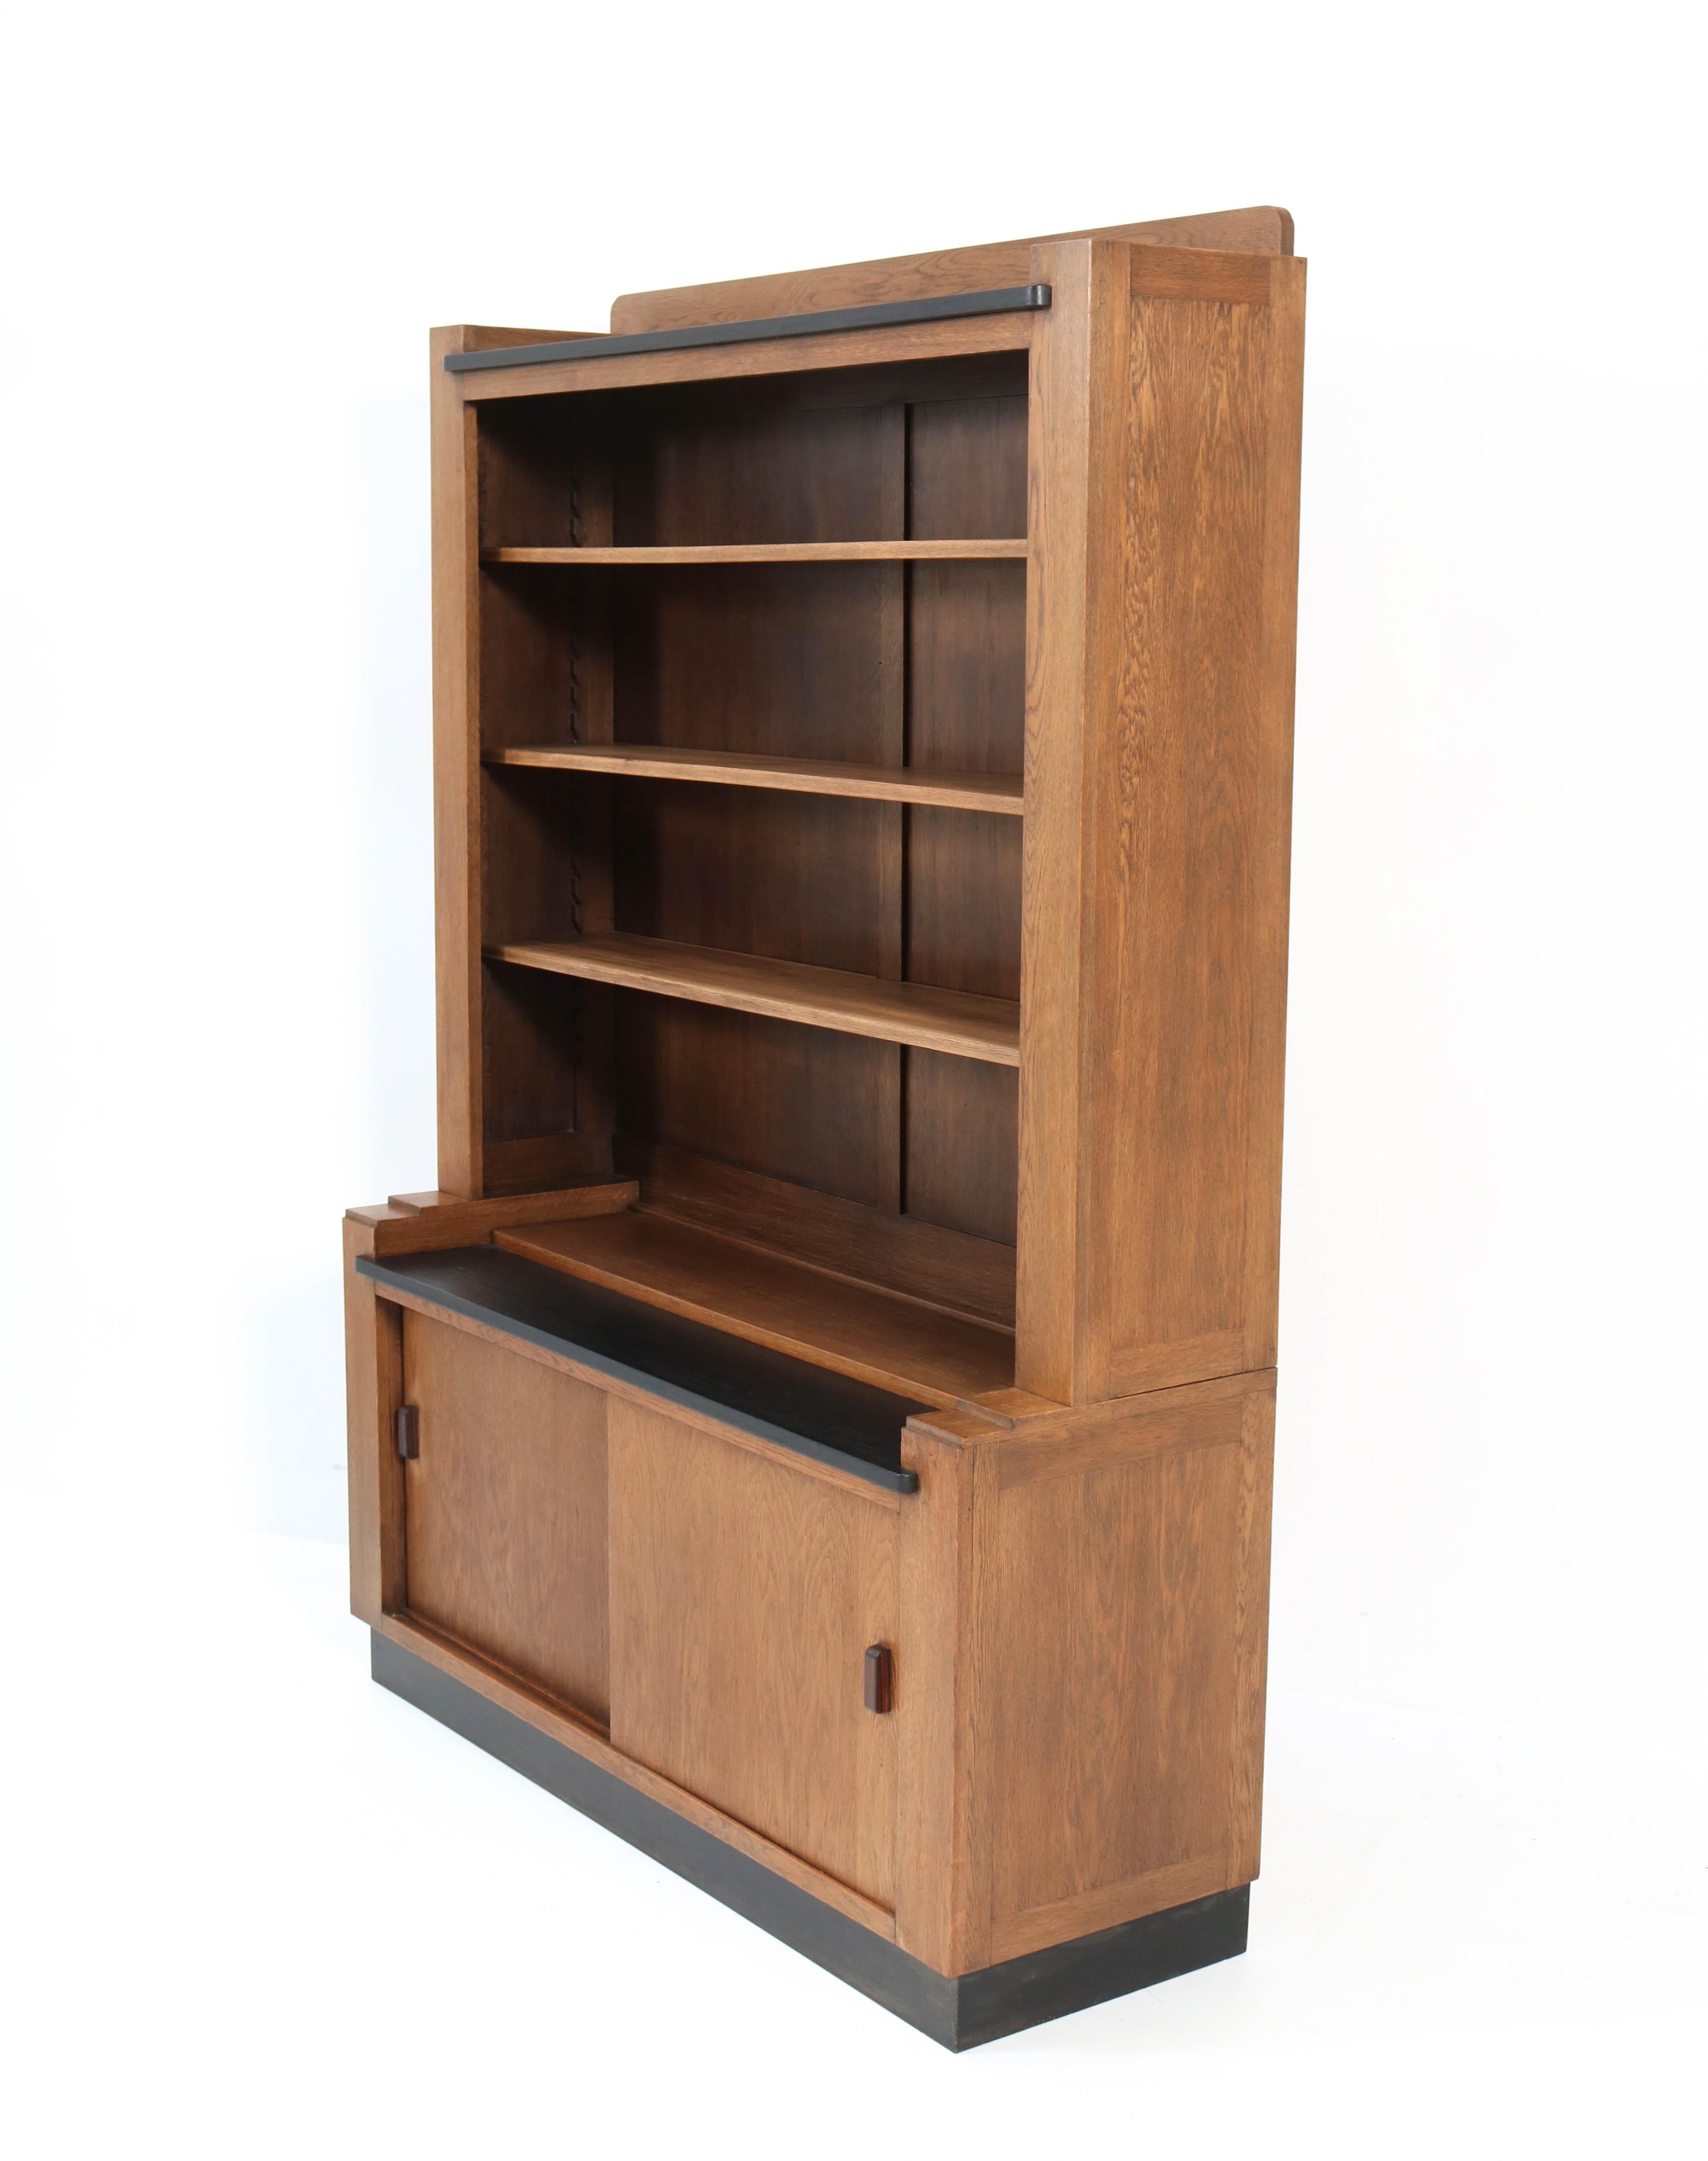 Early 20th Century Oak Art Deco Haagse School Bookcase by Cor Alons for L.O.V. Oosterbeek, 1920s